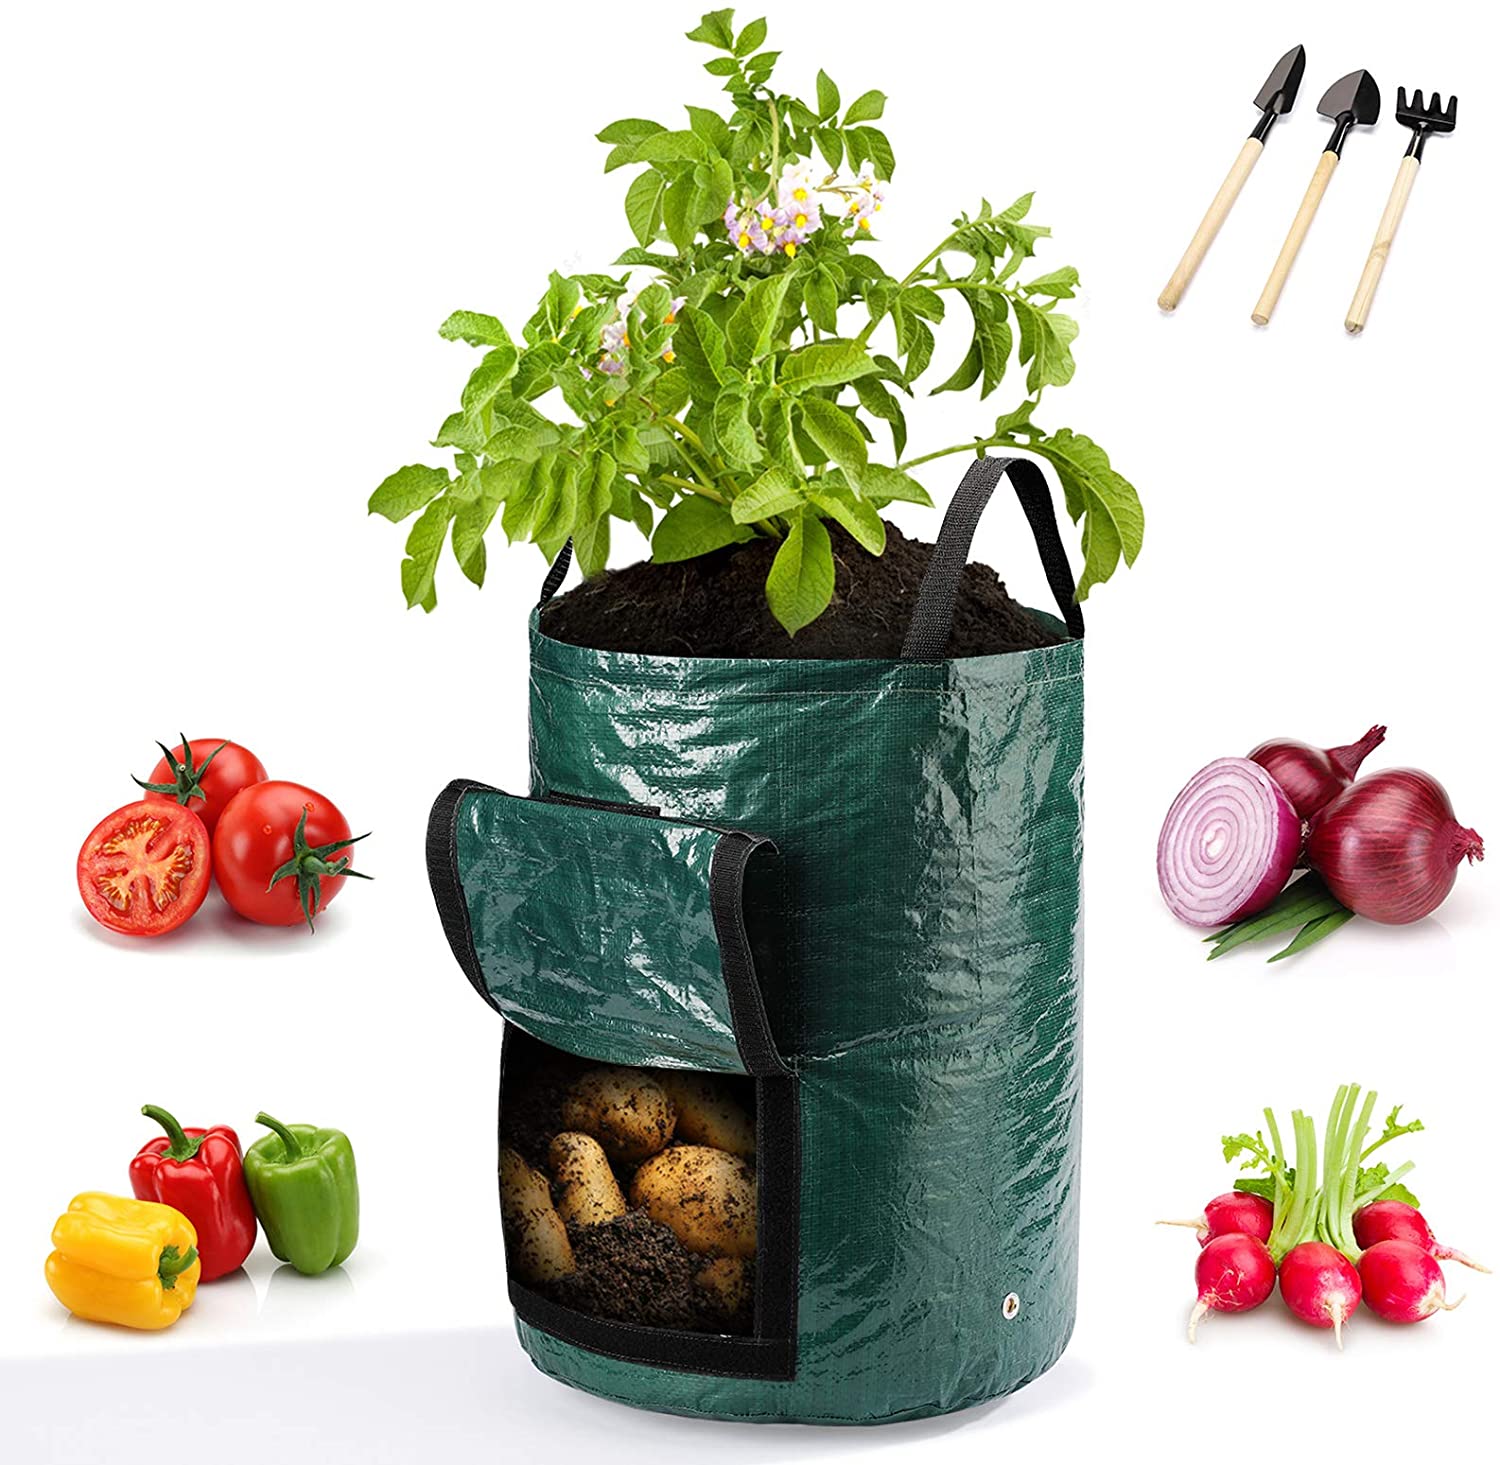 (70% off)Potato Grow Bags Vegetable Grow Pots with 3 Tools, Visualization Velcro Window Garden Grow Bags(4 Pack 10 Gallon ) $9